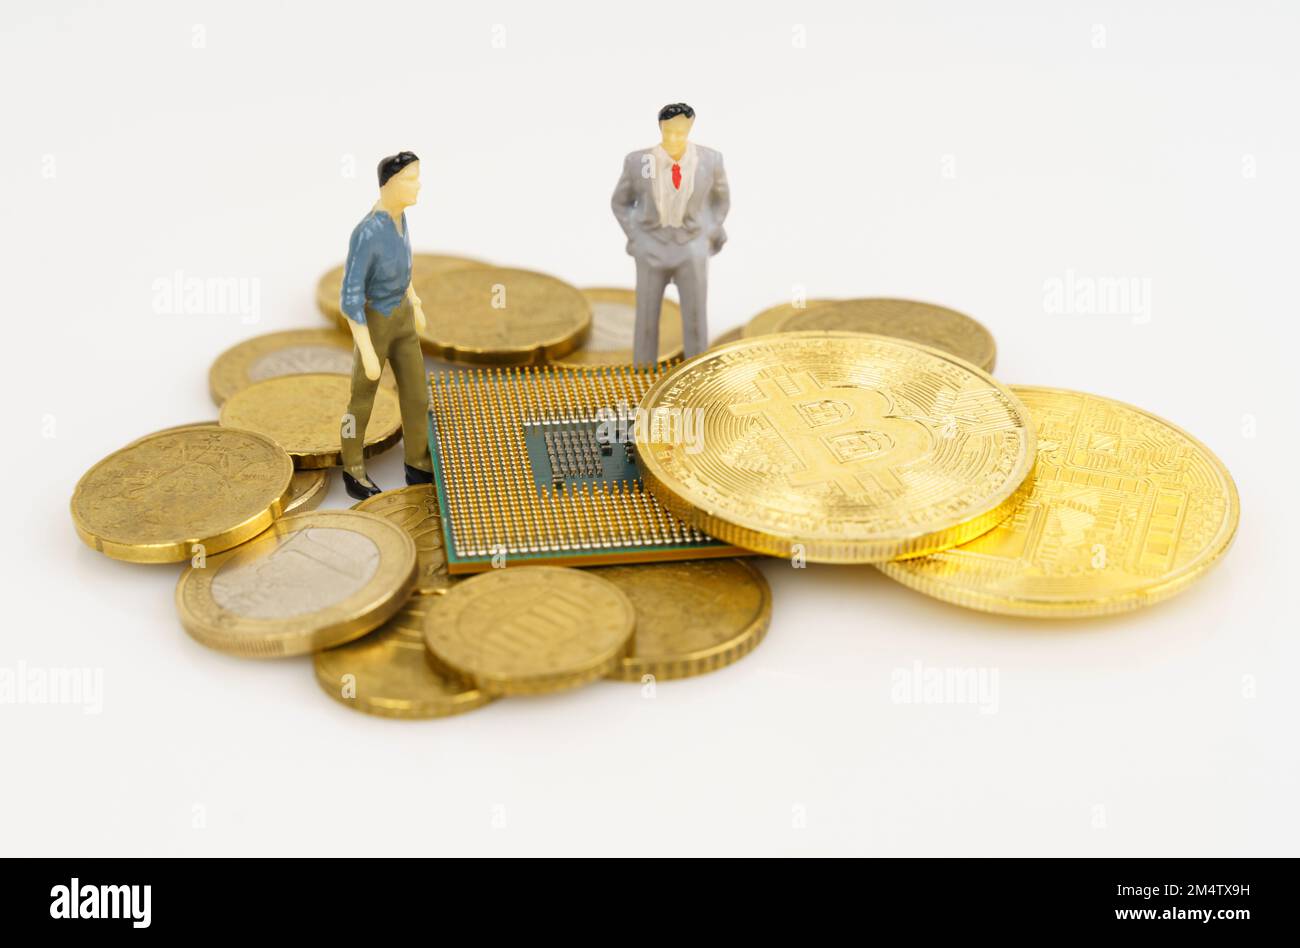 Cryptocurrency and business concept. On a white surface are coins, a processor, bitcoin and miniature figures of people. Stock Photo